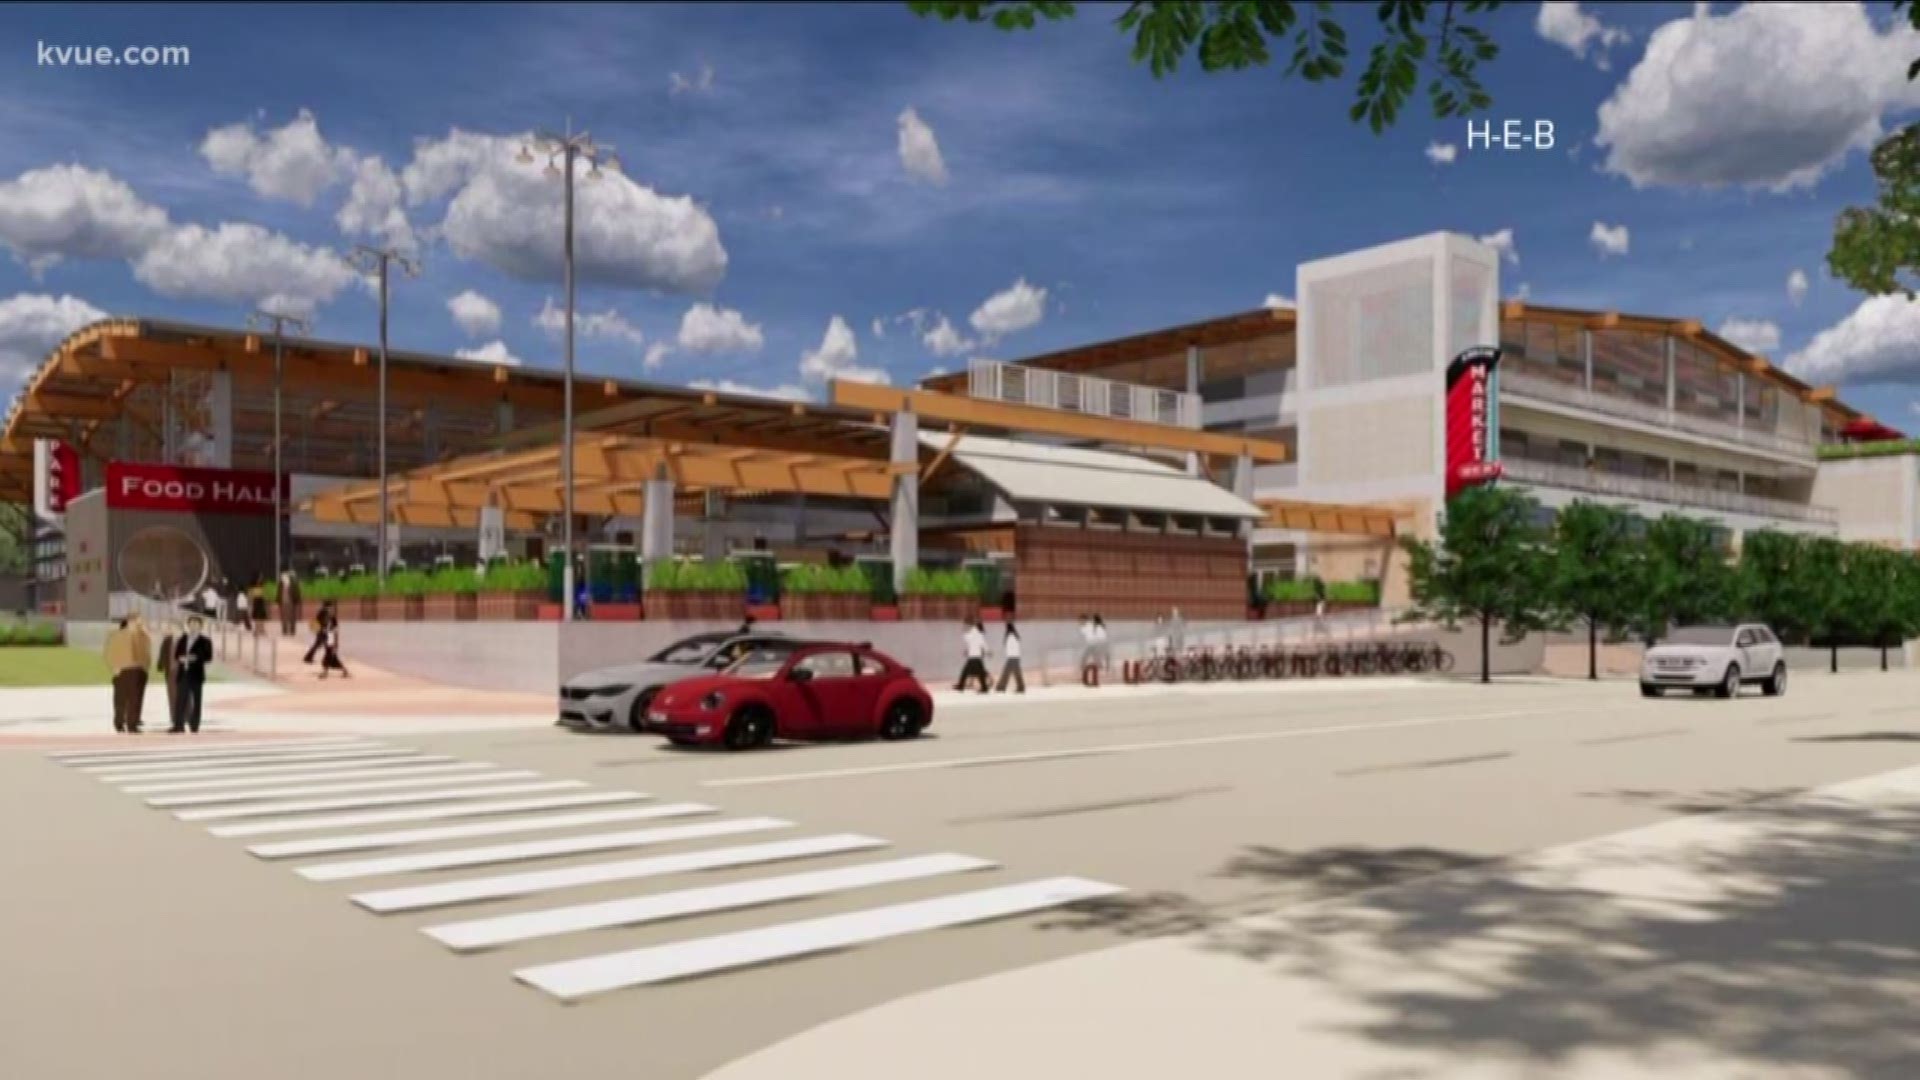 H-E-B is pushing back renovations of its South Congress store.